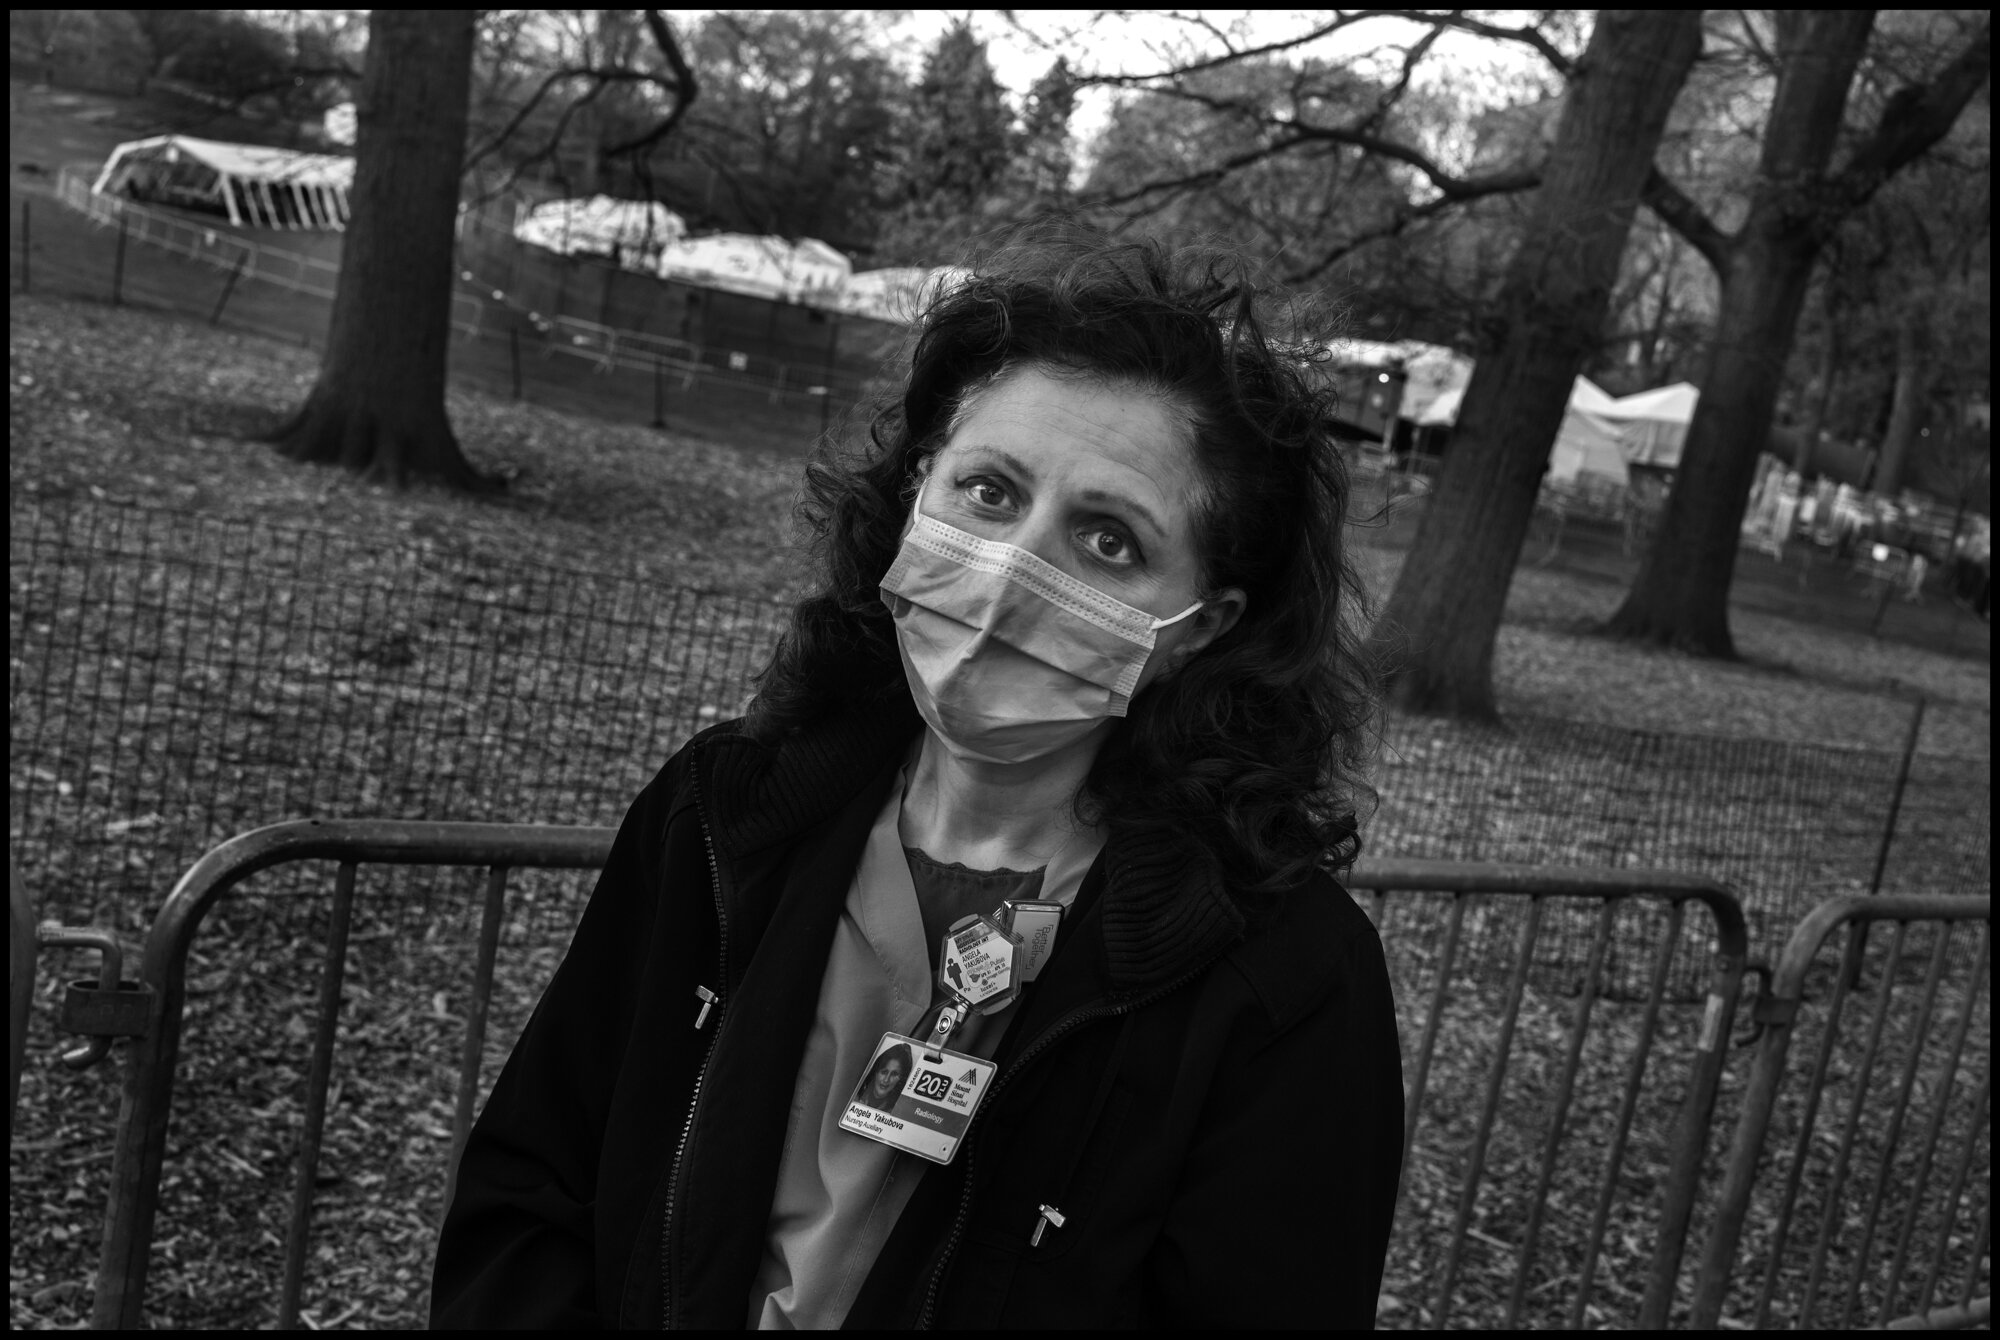  Another nursing assistant, Angela, 54, originally from Baku in Azerbaijan, and now 26 years in the United States.   April 16, 2020. © Peter Turnley  ID# 22-003 